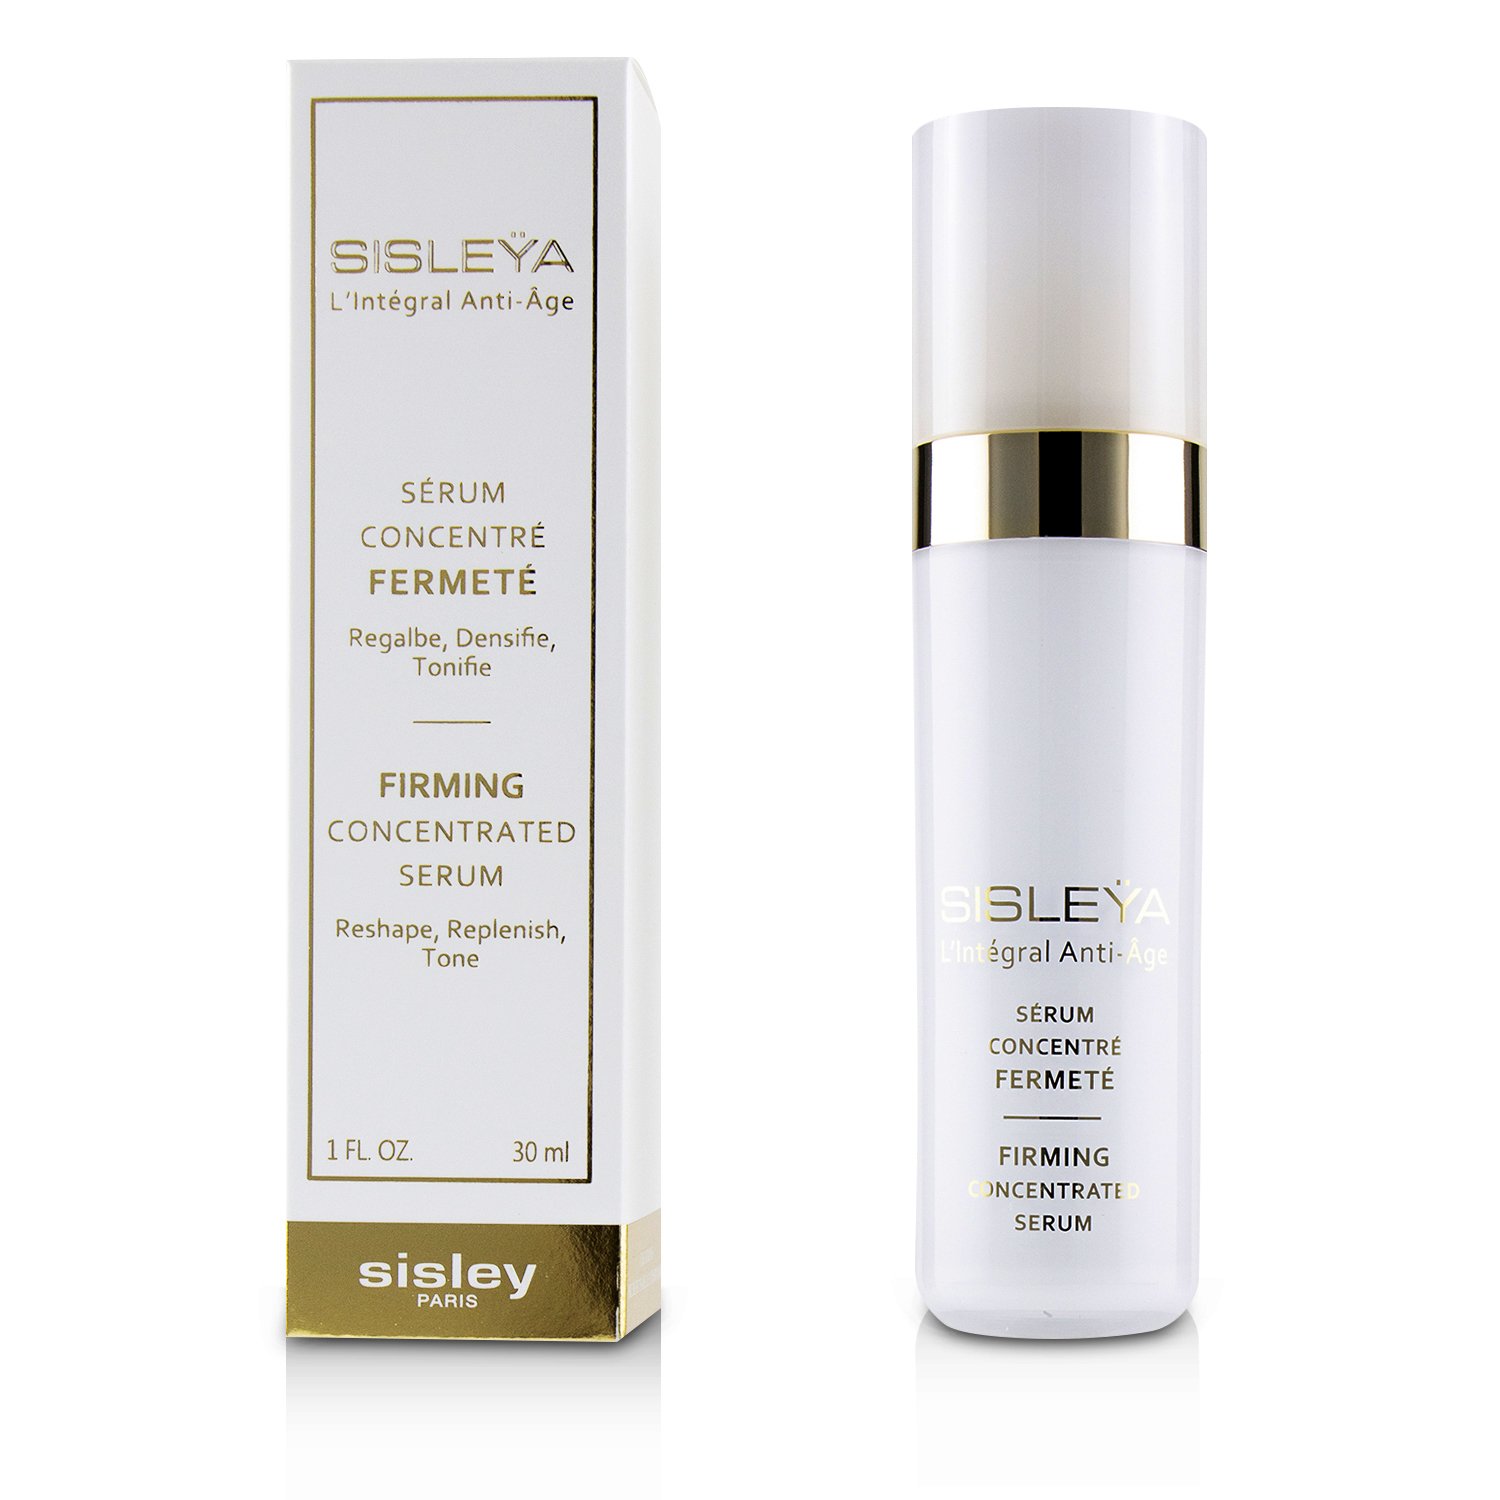 Photos - Cream / Lotion Sisley Paris L'Integral Anti-Age Firming Concentrated Serum